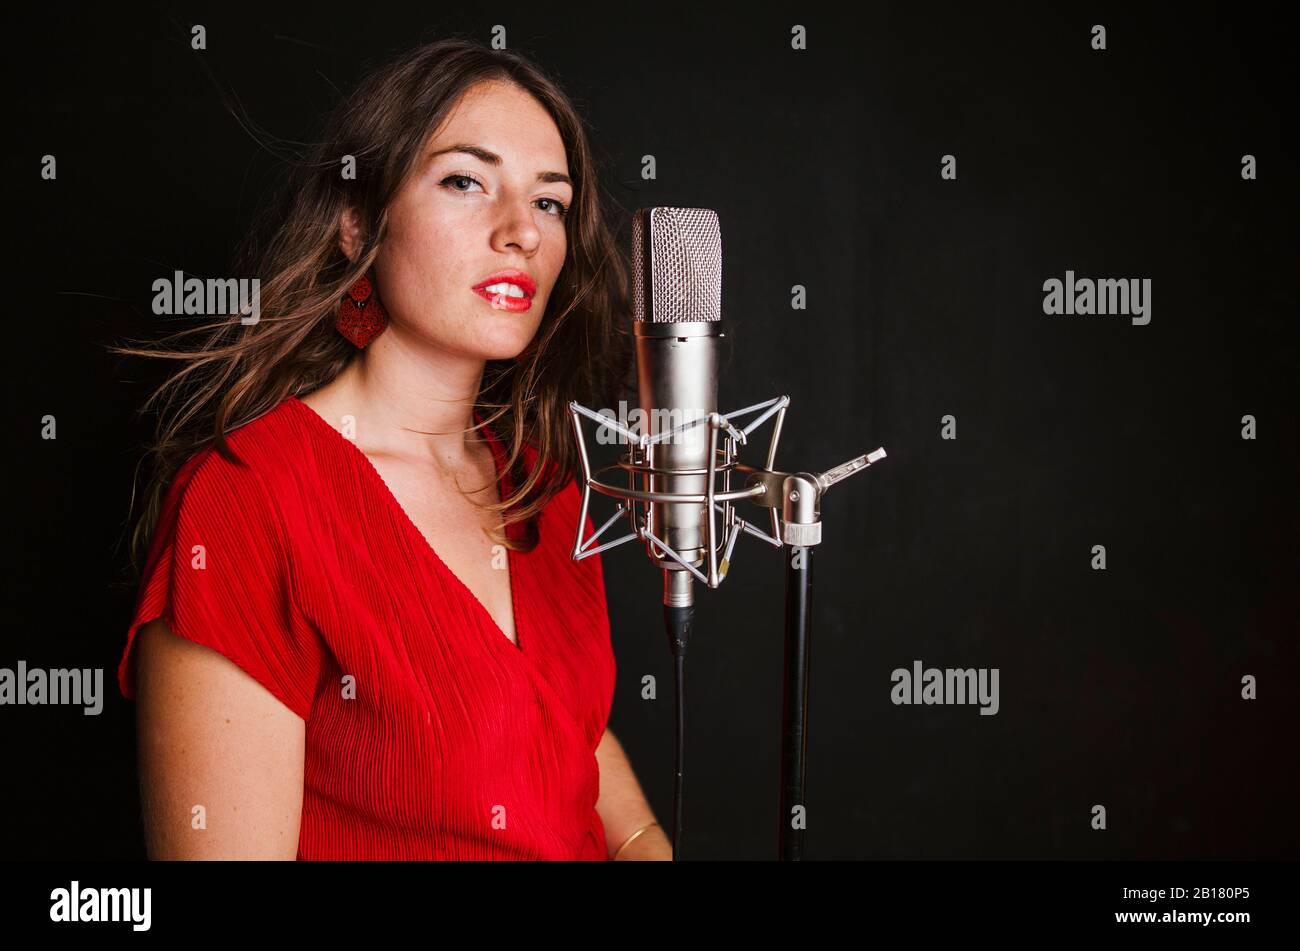 Portrait of female singer with microphone, wearing red dress Stock Photo